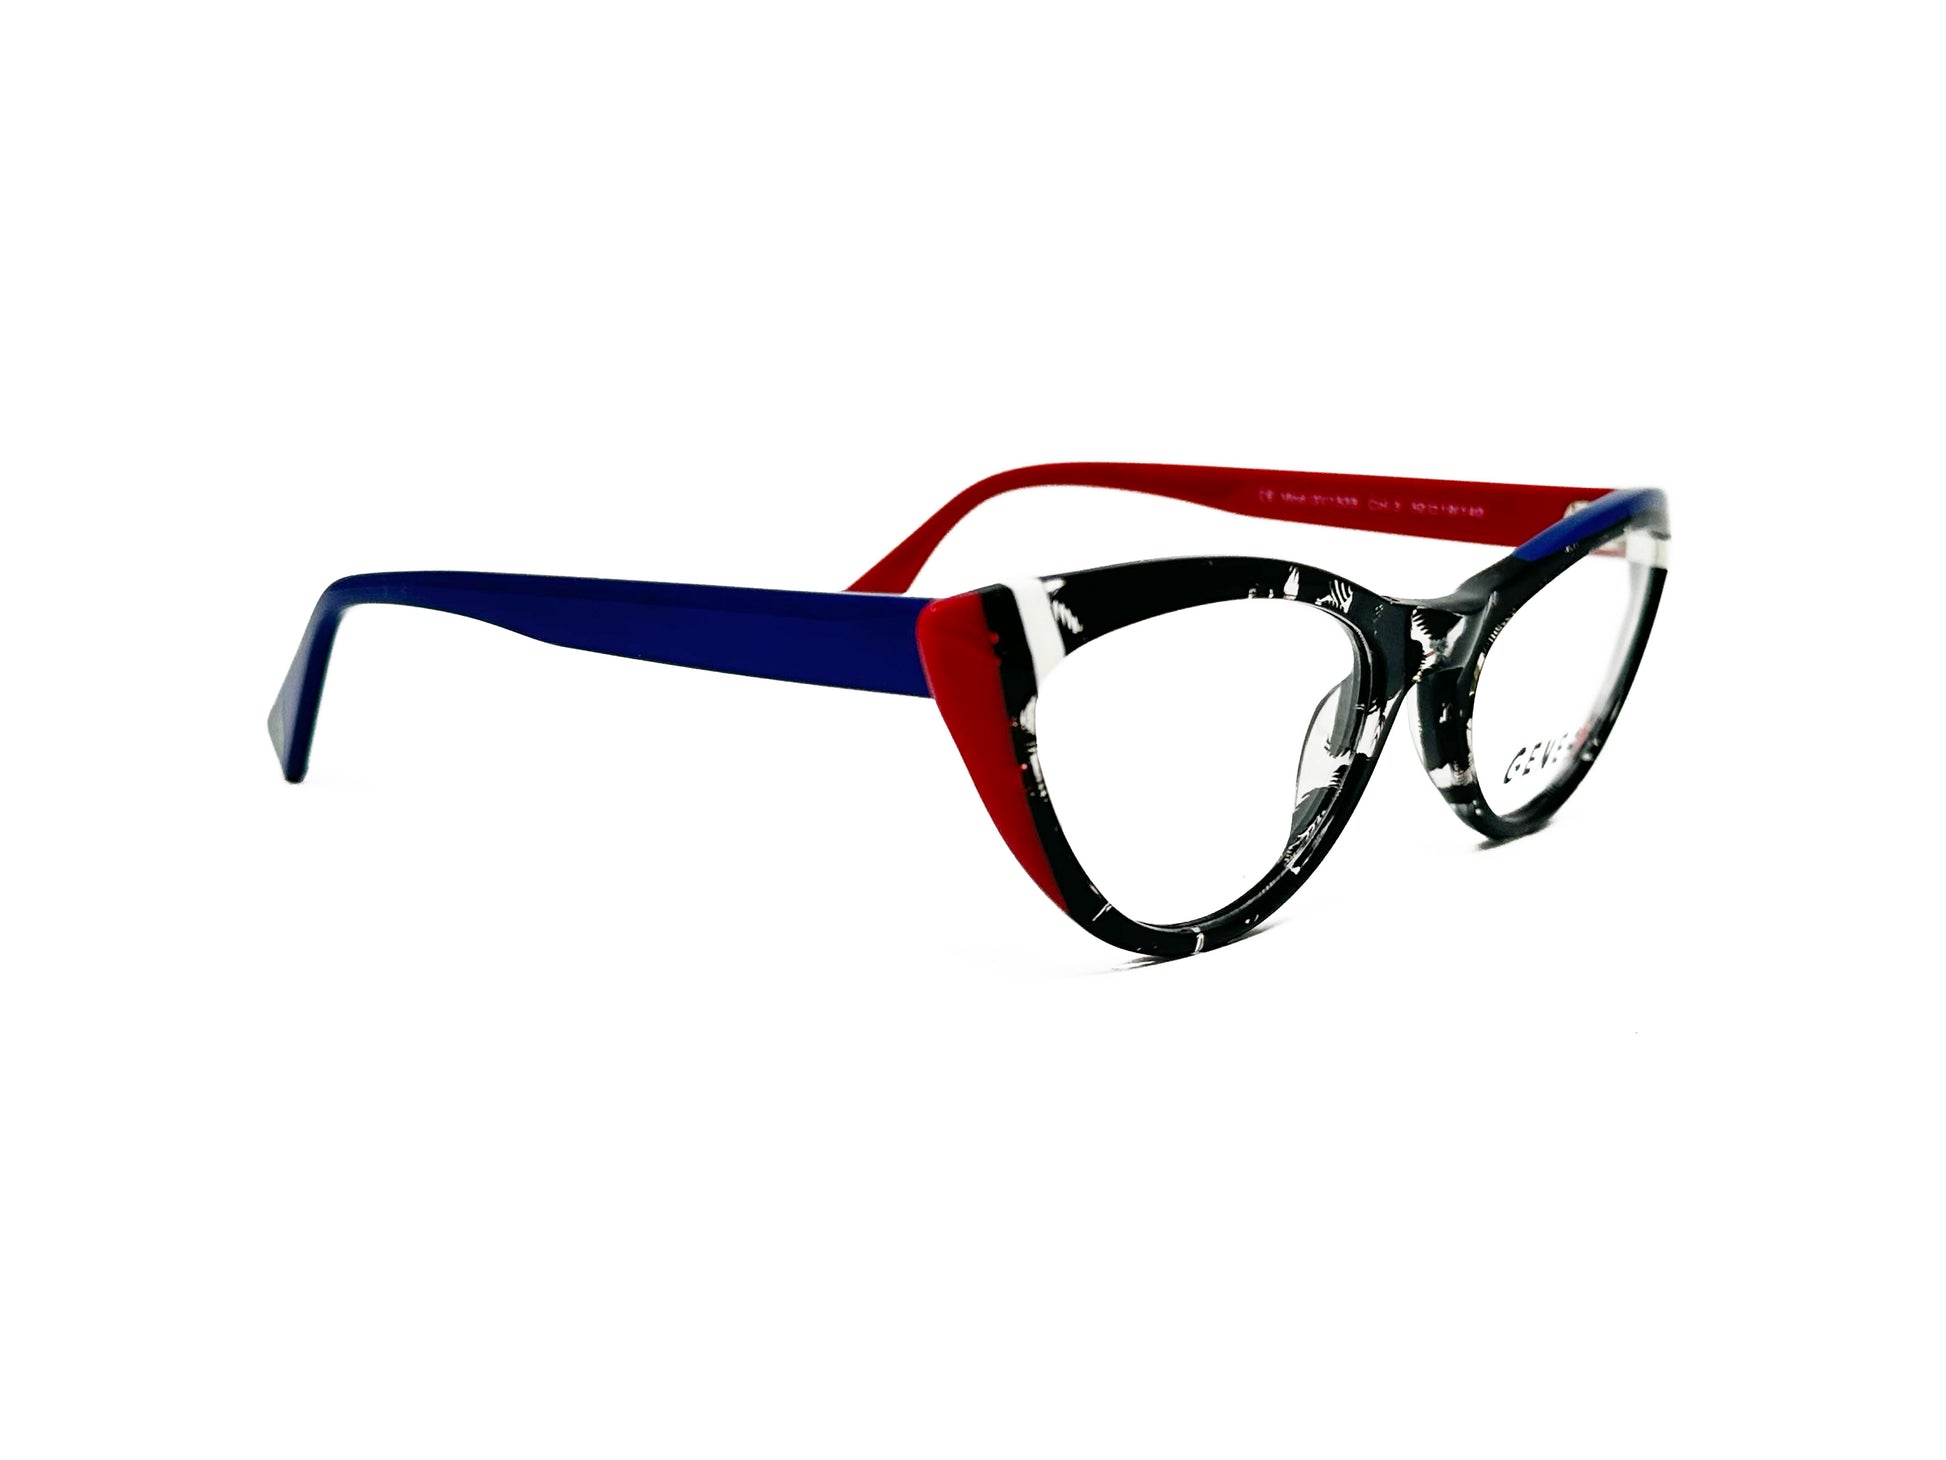 Genesis narrow, cat-eye, acetate optical frame. Model: GV1535. Color: 3 - Black with transparent pattern and red and white stripes on corner of frame. Blue temples.SIde view.